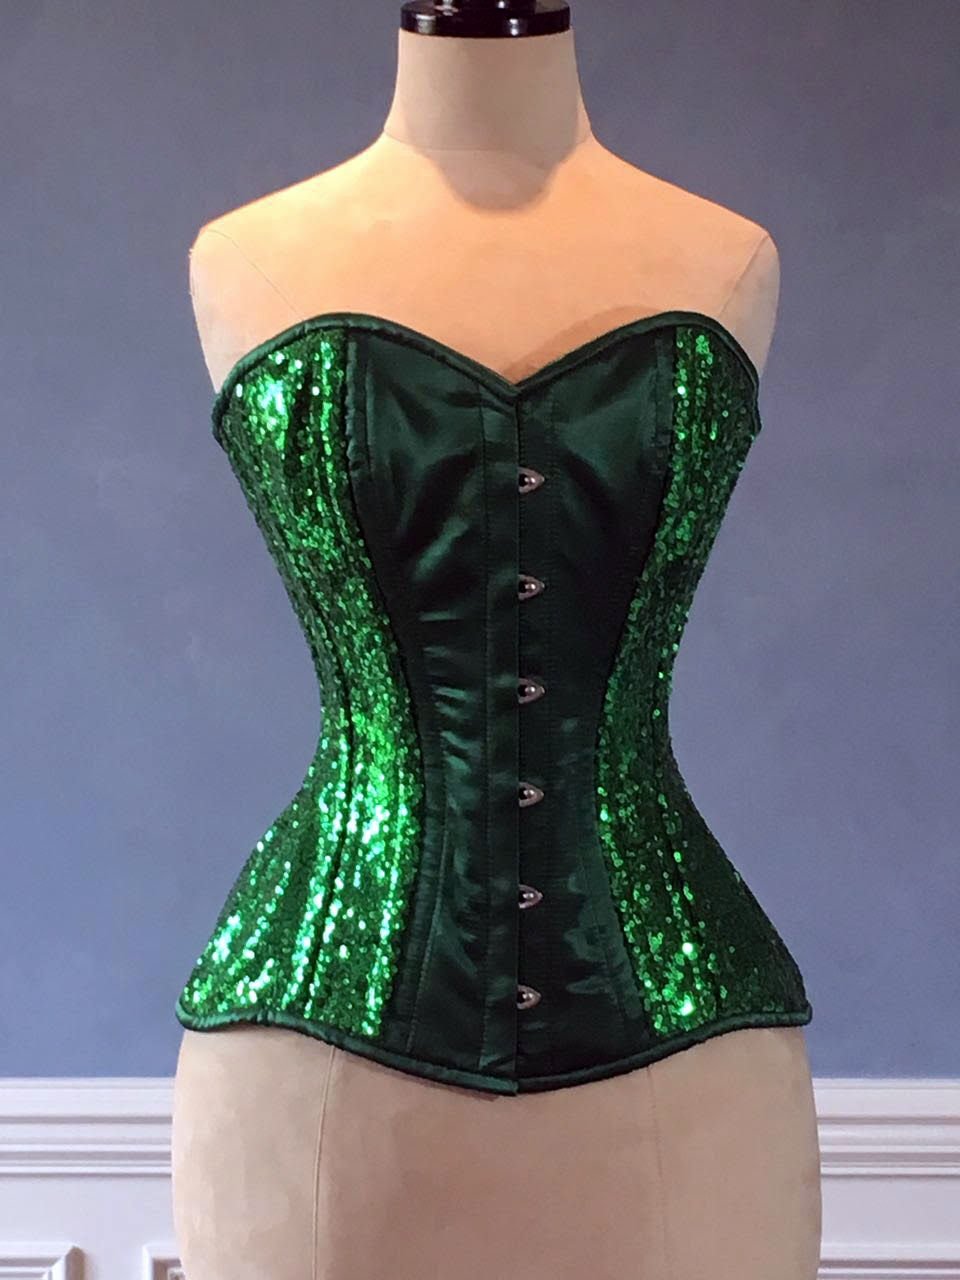 Exclusive satin overbust authentic corset with classy drapery. Steel-boned  corset for tight lacing